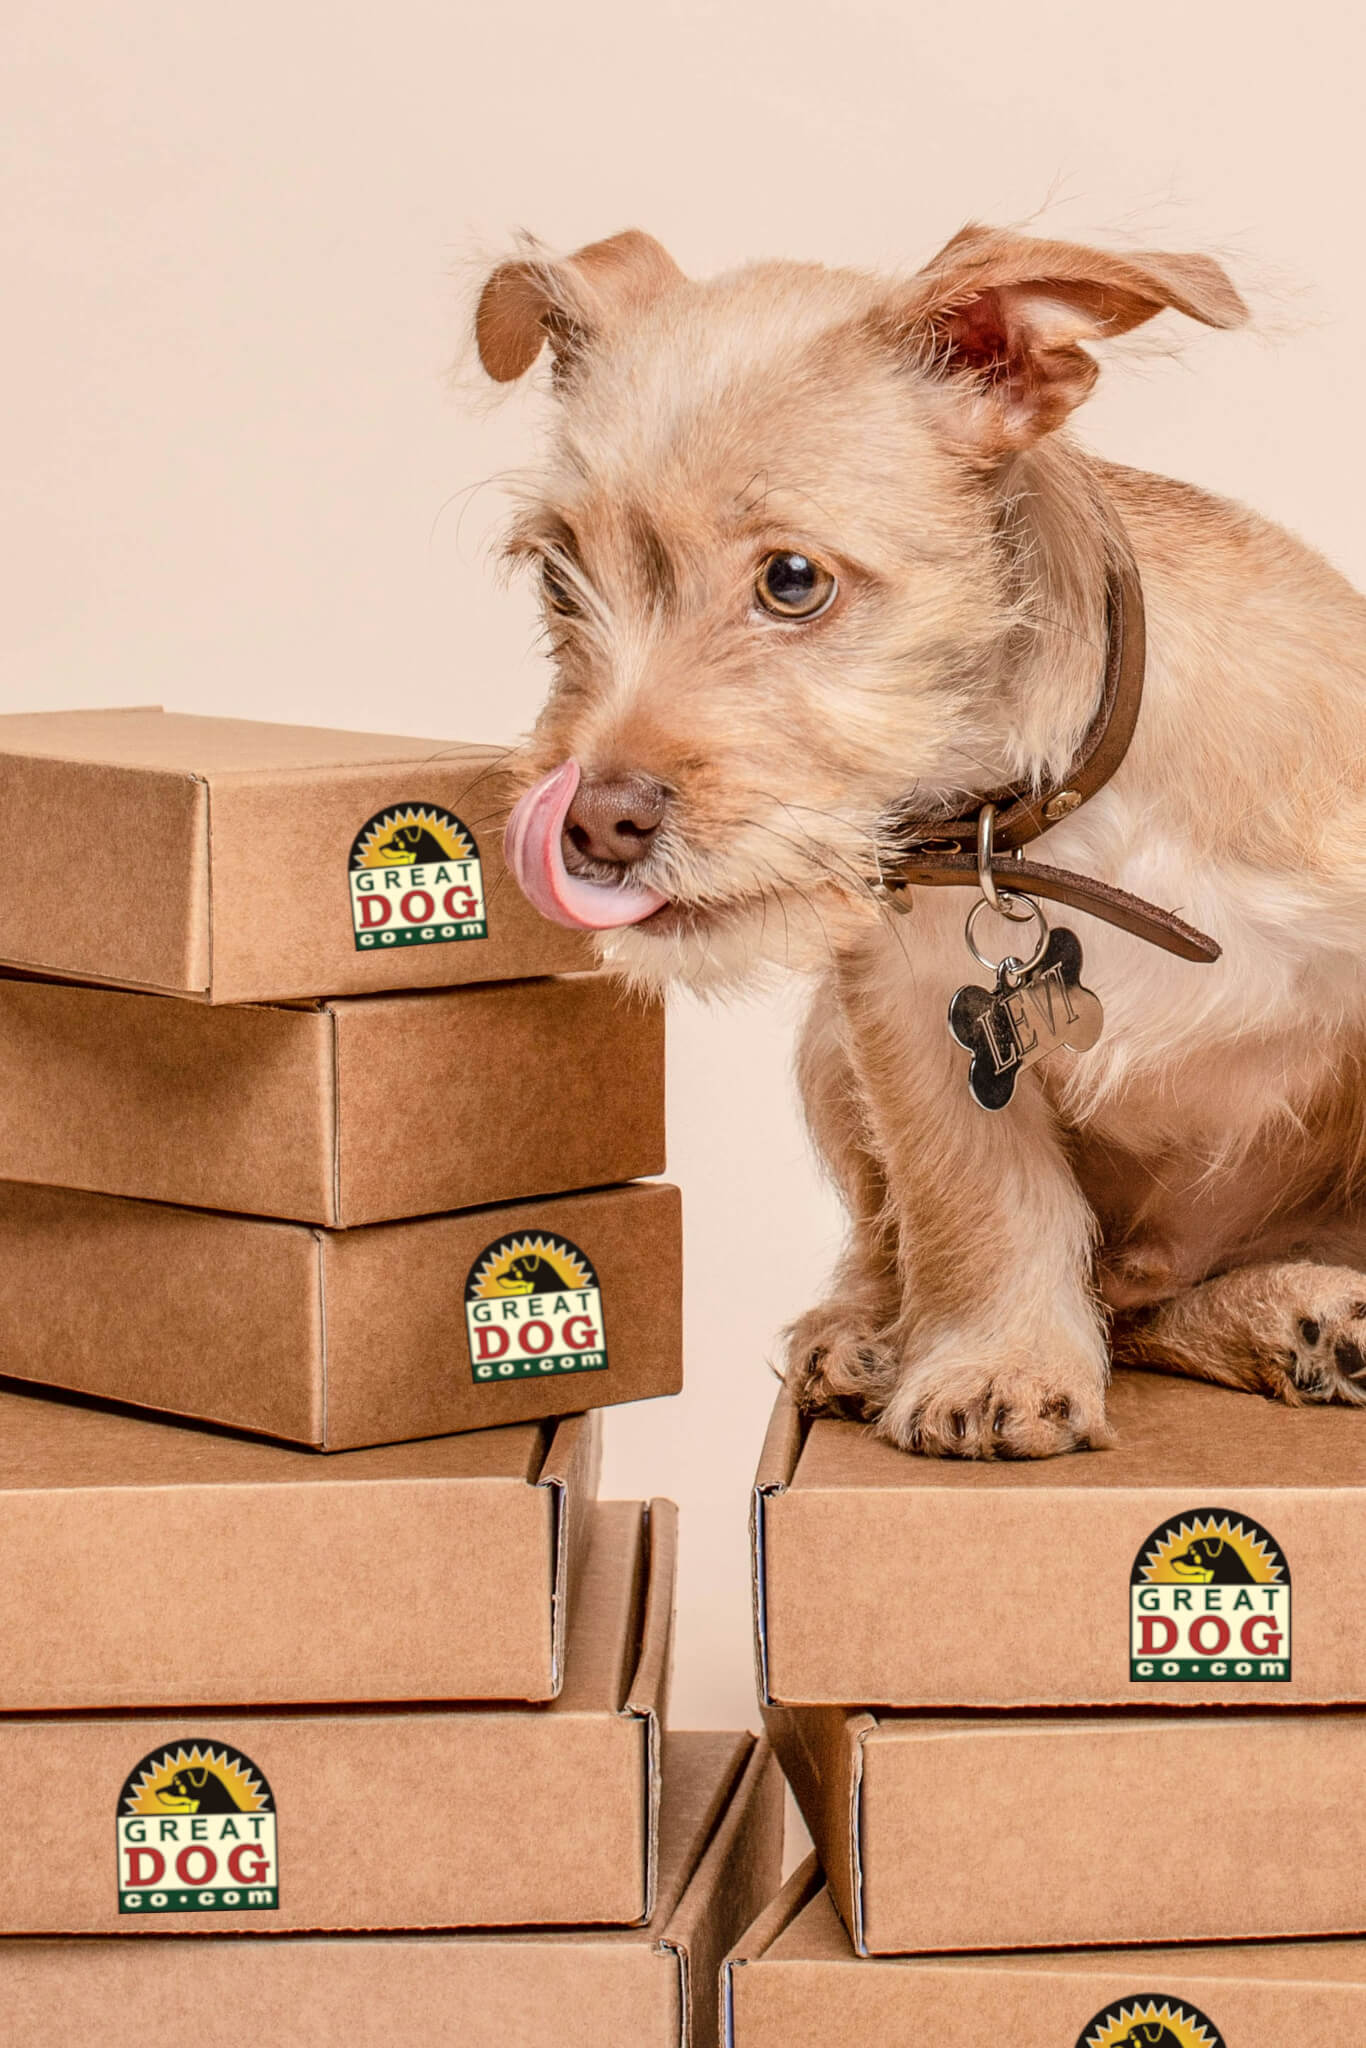 terrier-dog-sitting-on-gread-dog-boxes-with-text-why-not-give-them-the-best